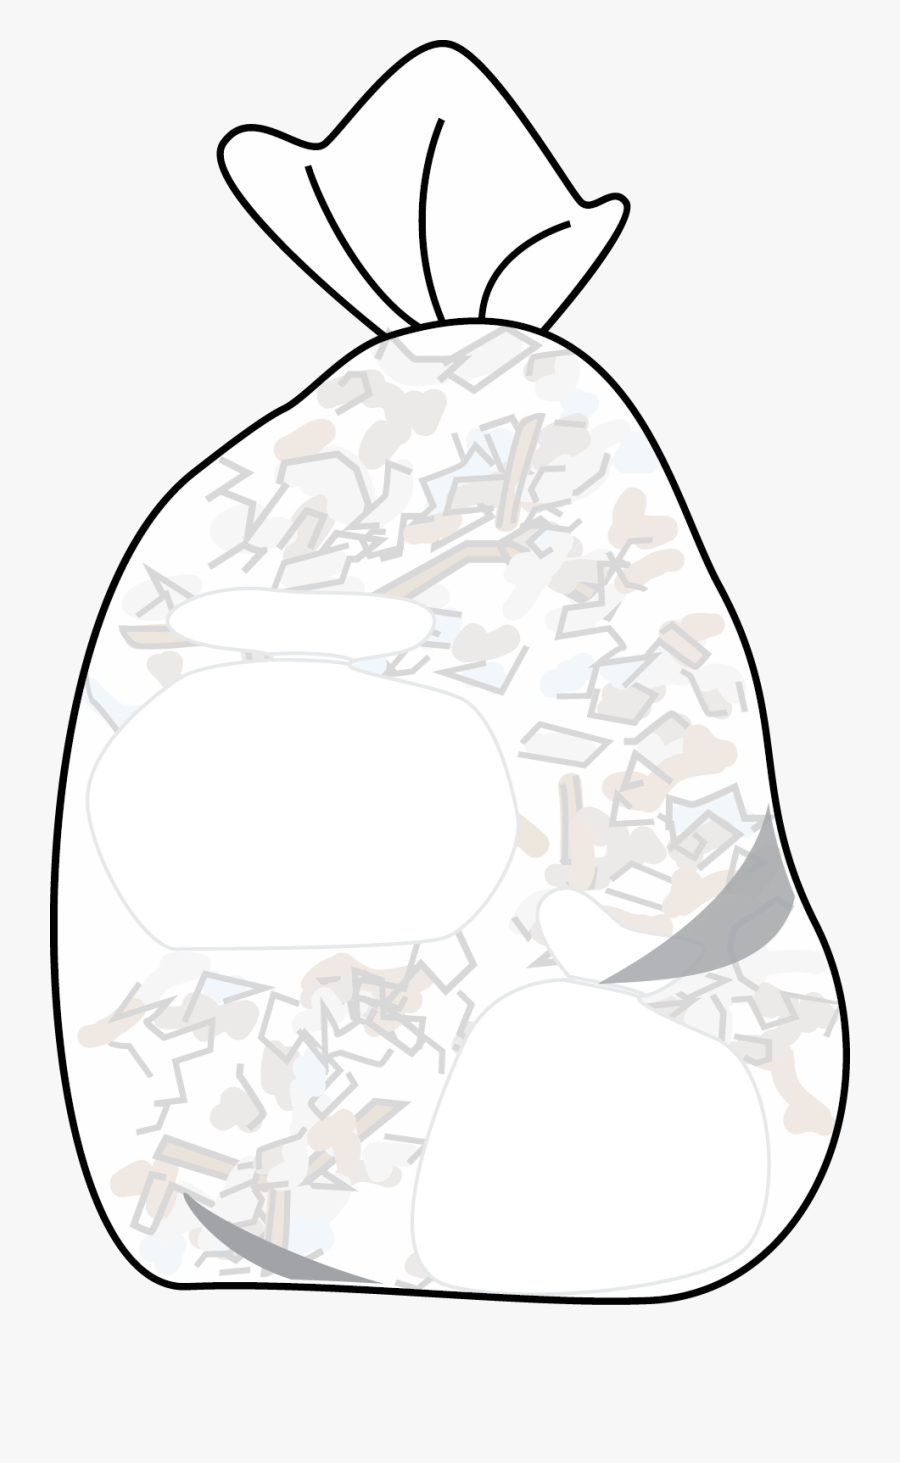 Bags Clipart Garbage - Throwing Out Garbage Bags Transparent Clipart, Transparent Clipart